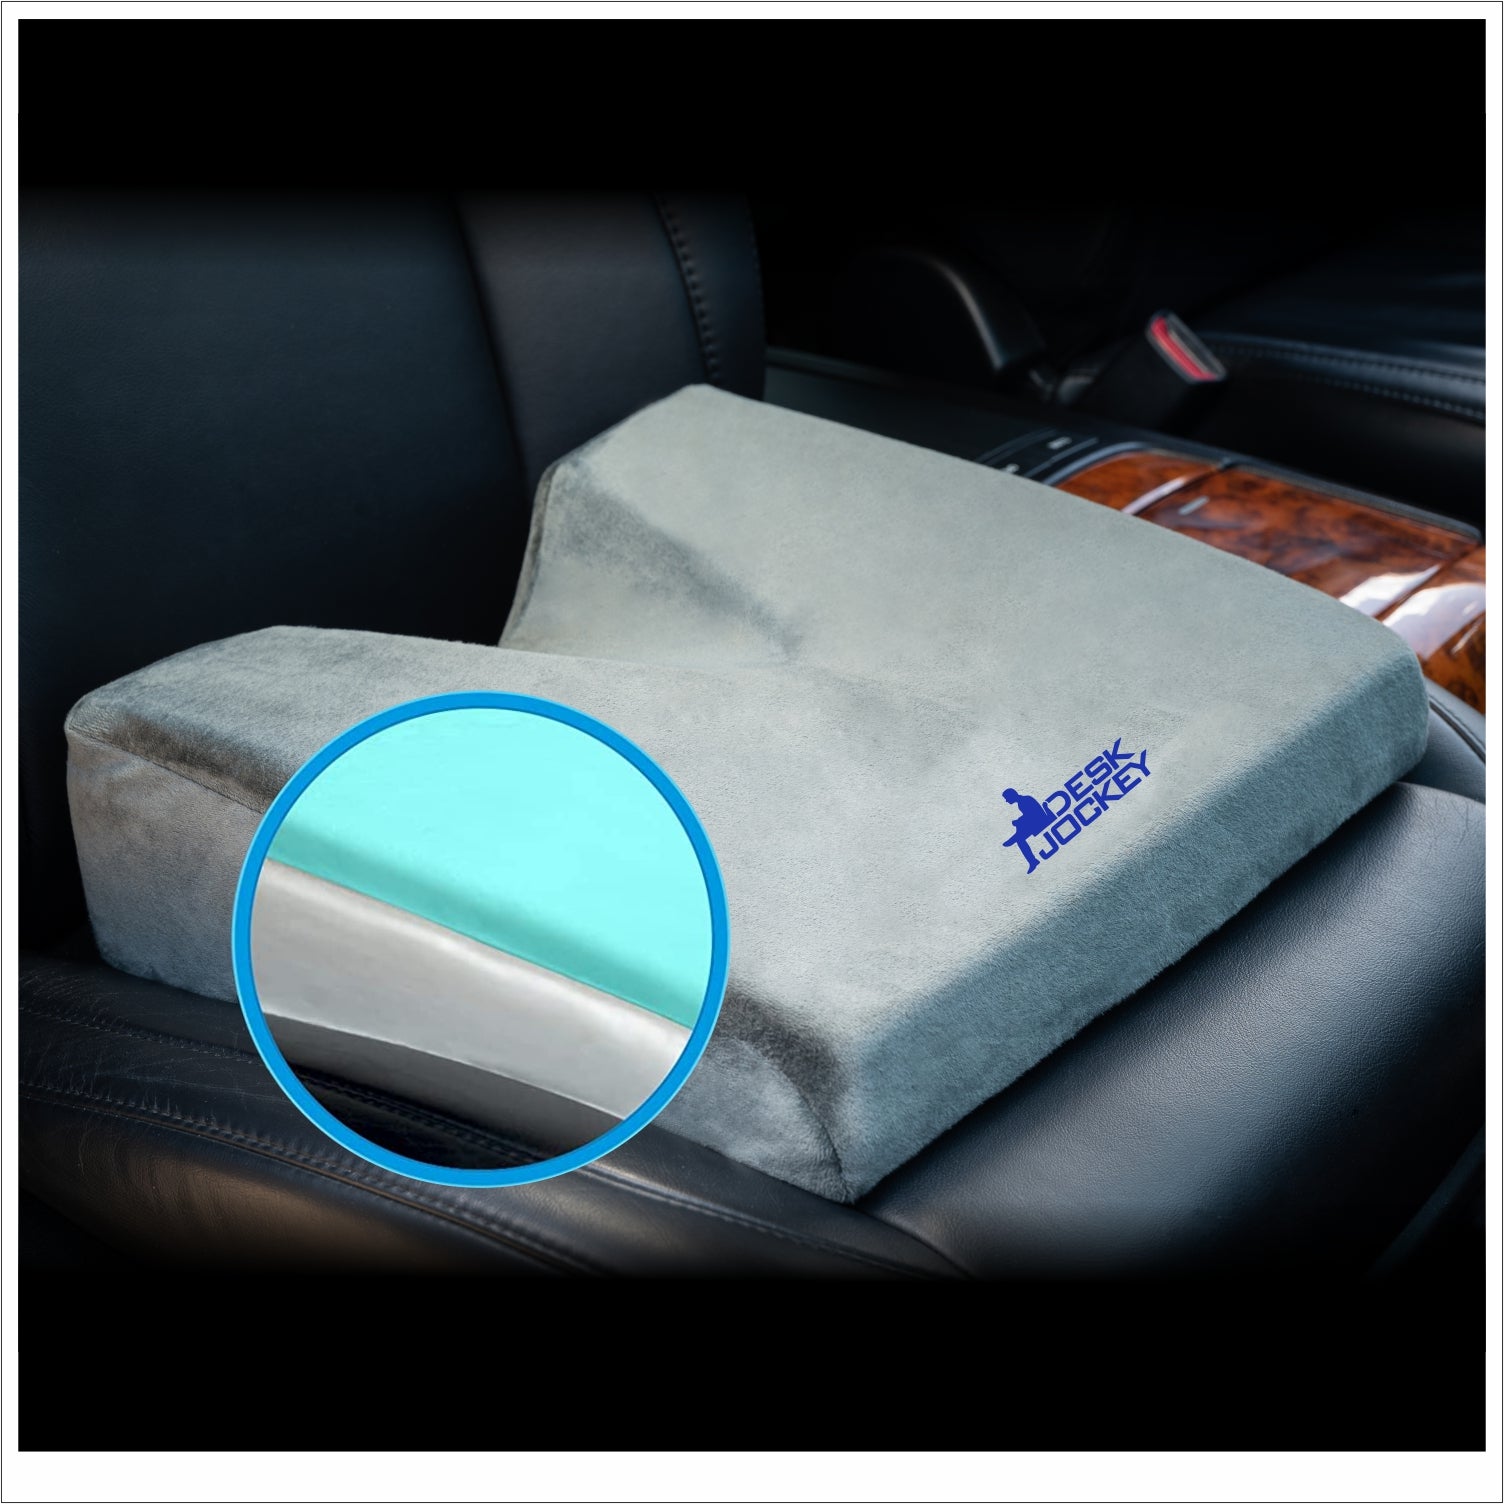 Car Seat Booster Cushion with Strap - Extra Firm for Added Height, Thick 2  Inch Foam Auto Wedge, Coccyx Support for Back, For Drivers, Office Chairs